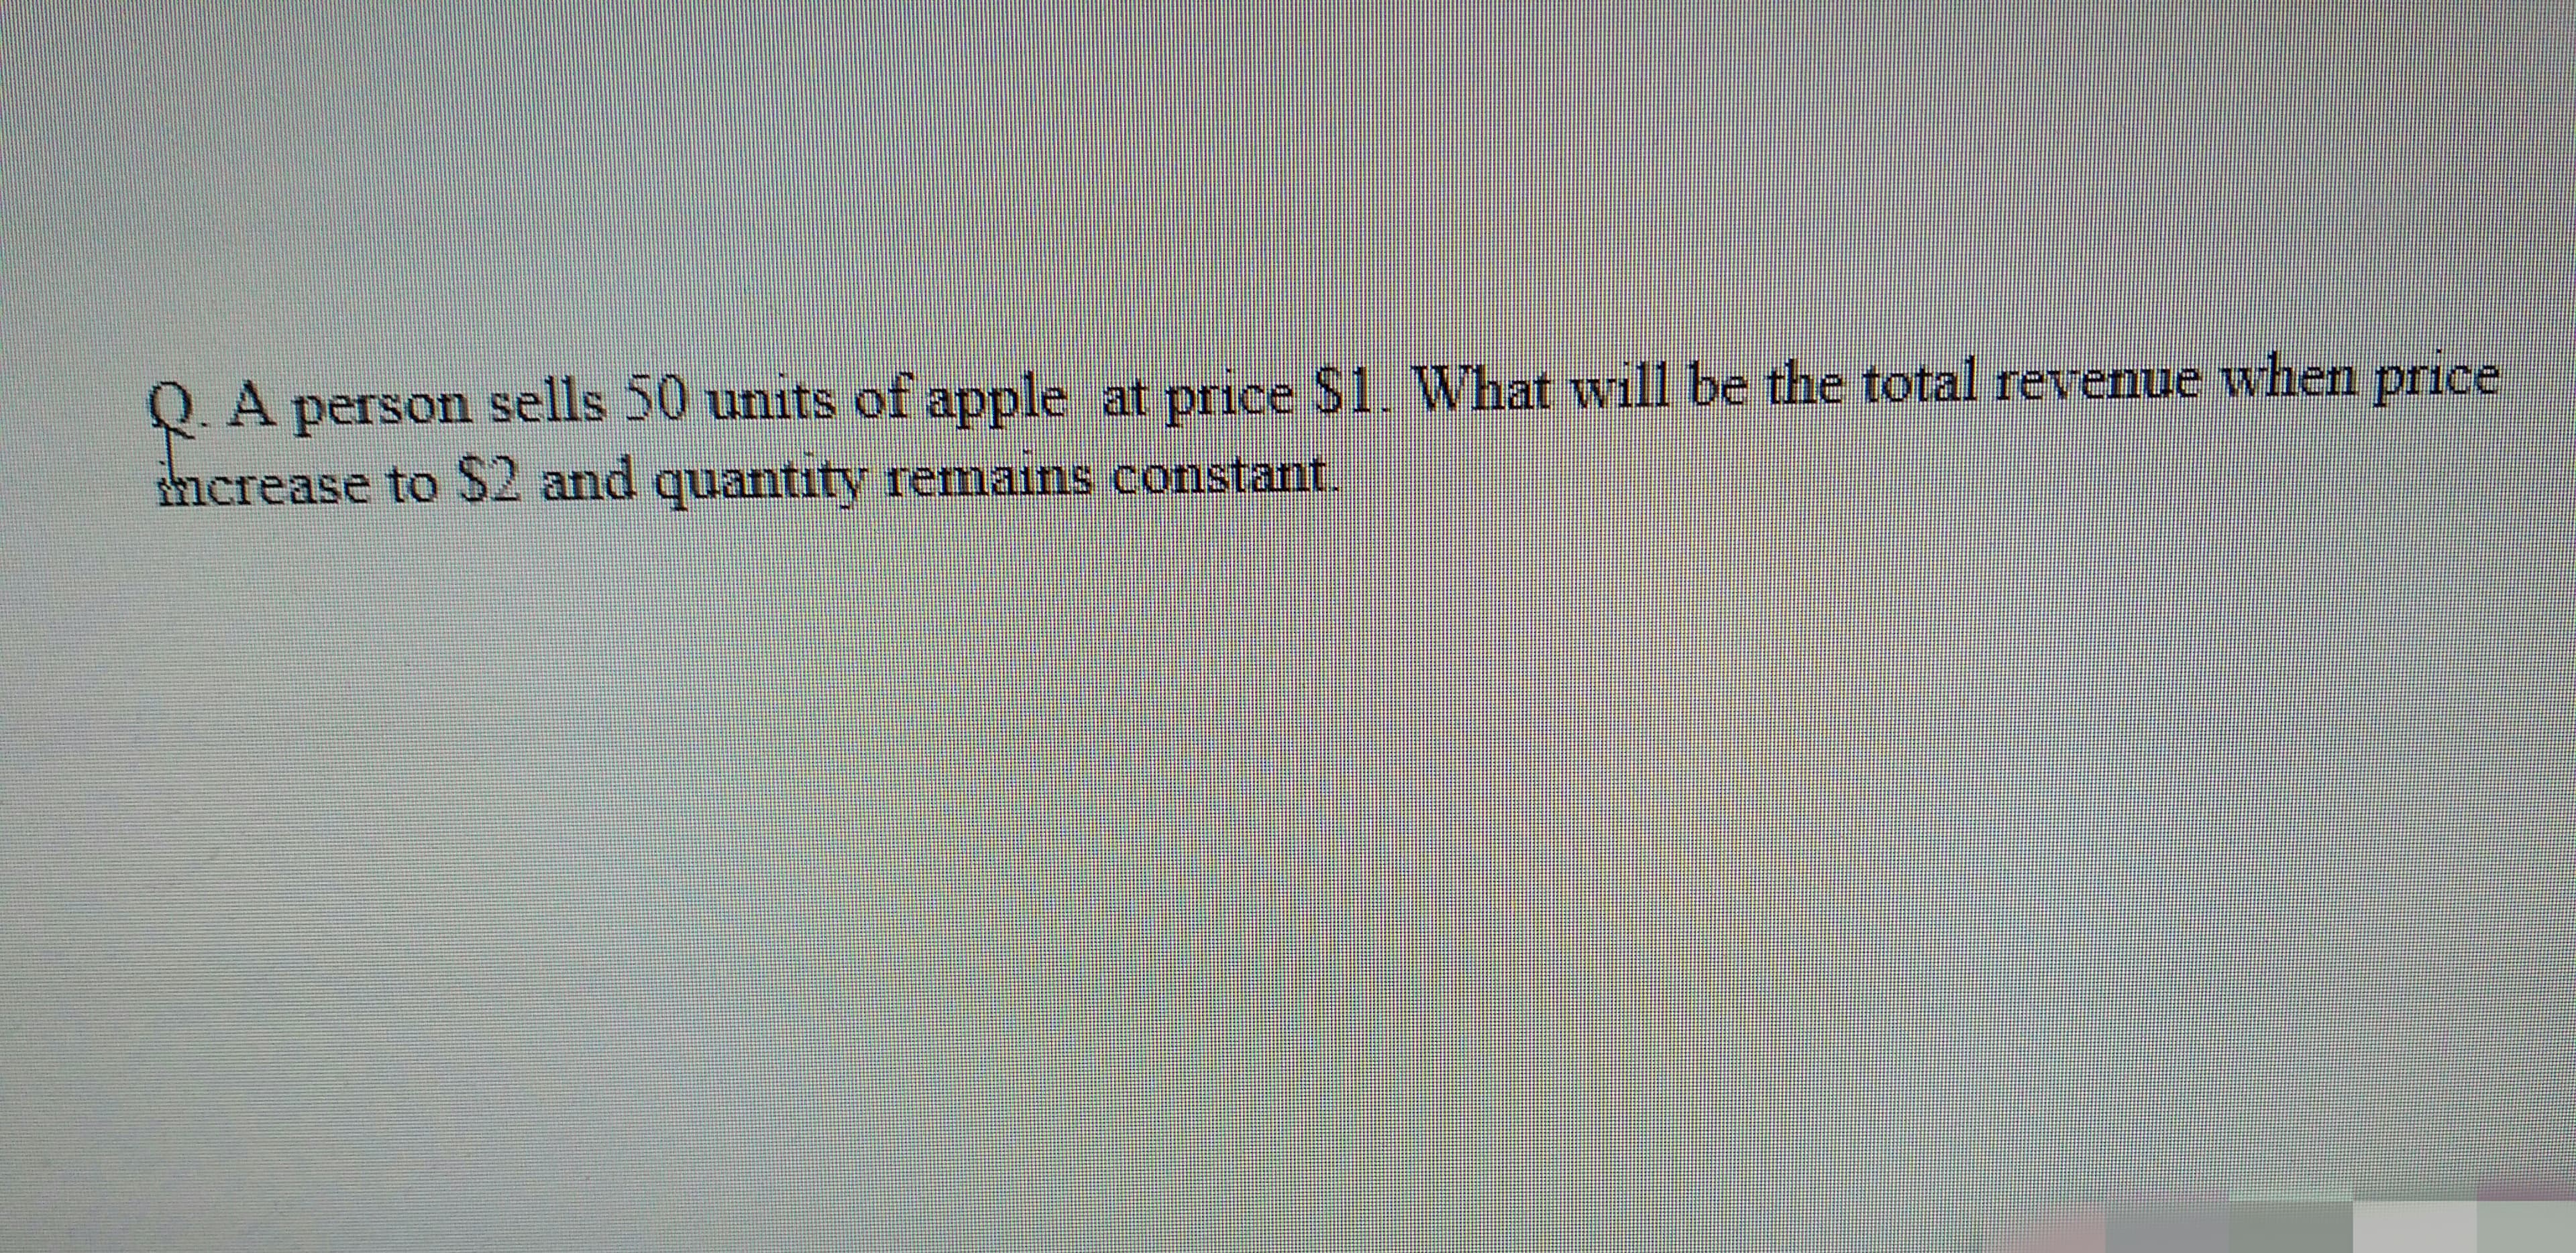 Q.A person sells 50 units of apple at price $1. What will be the total revenue when price
thcrease to $2 and quantity remains constant.
